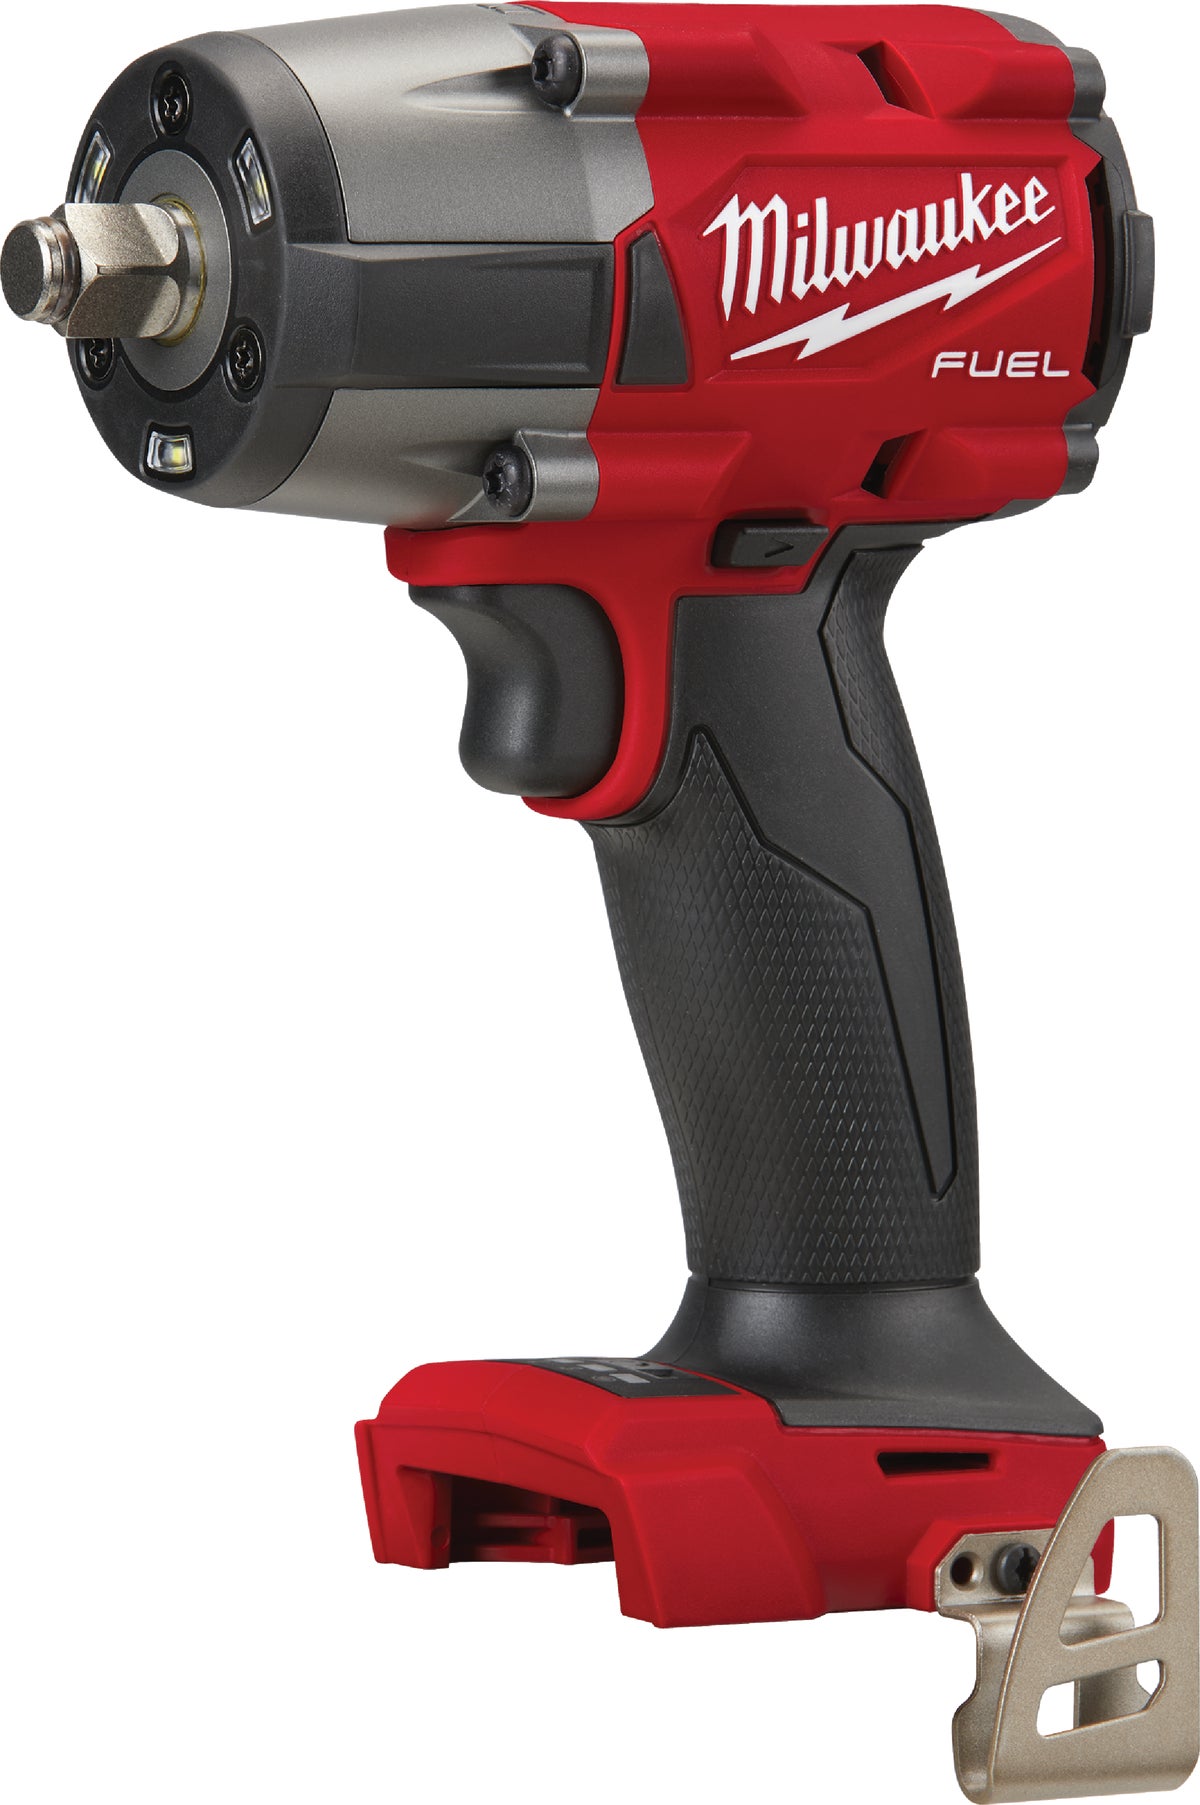 MW M18 FUEL Lithium-Ion Brushless Mid-Torque Cordless Impact Wrench